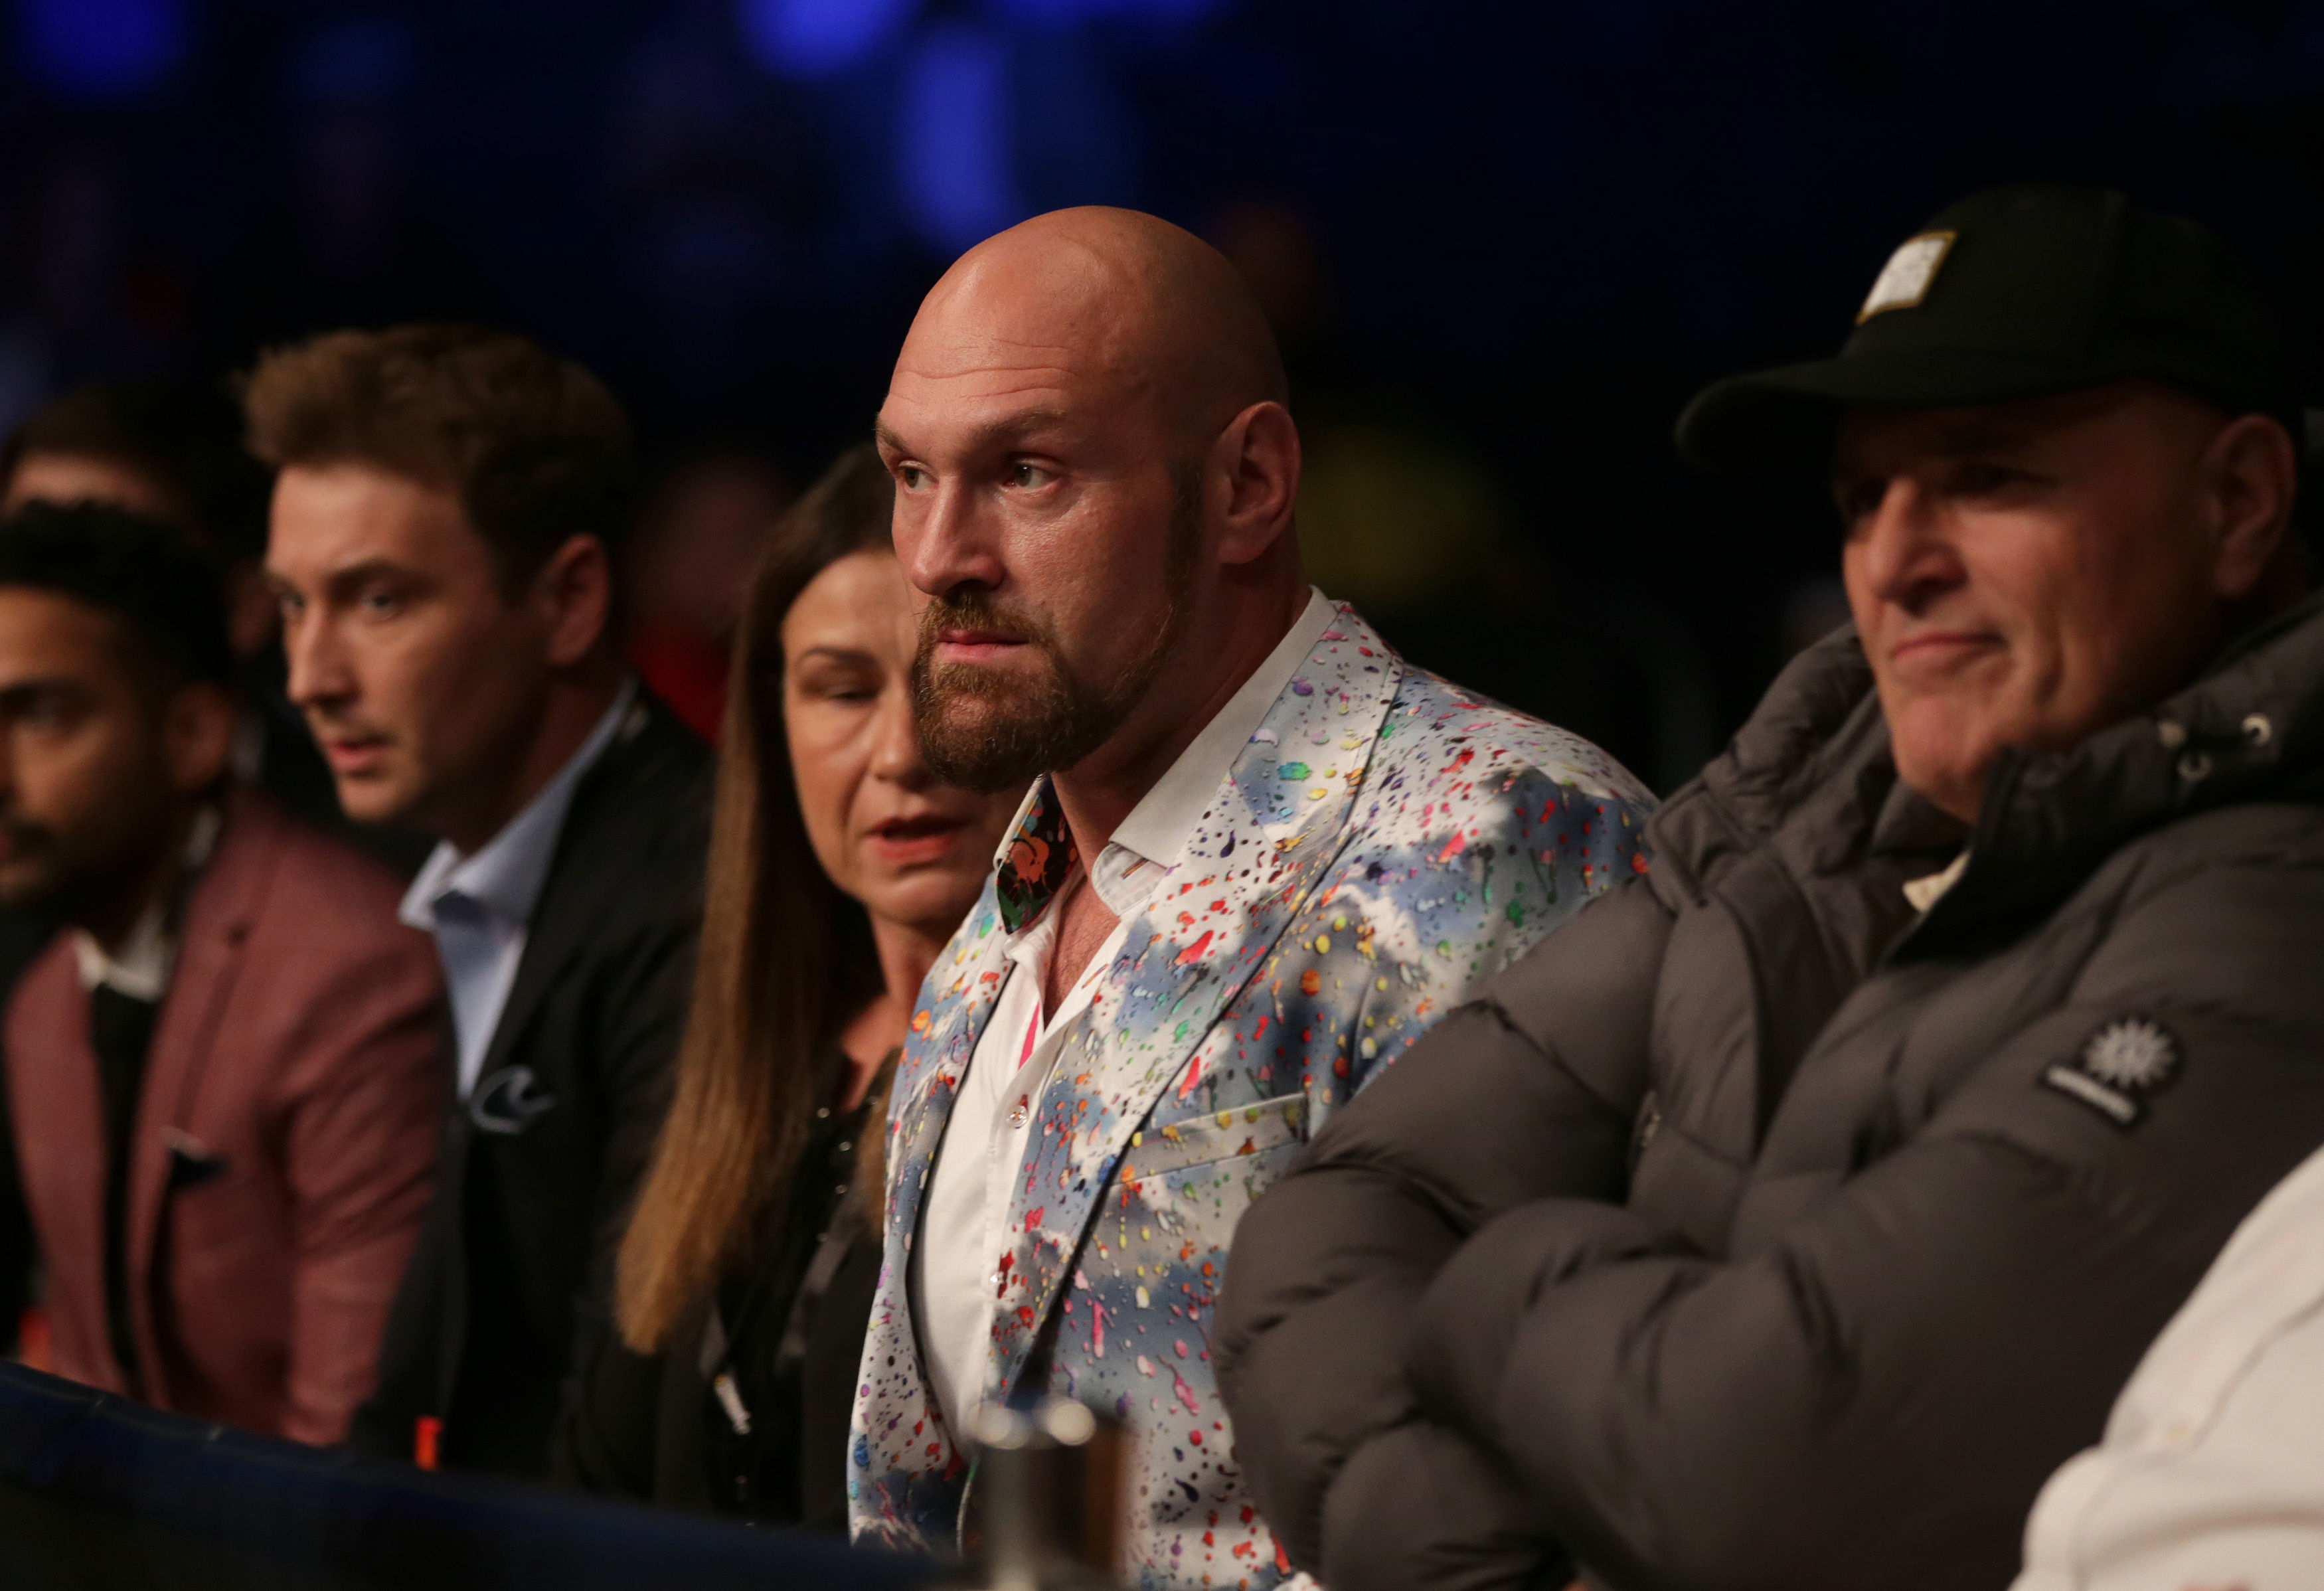 , Tyson Fury spotted out and about in Manchester as boxing champion films secret scenes for Netflix docuseries